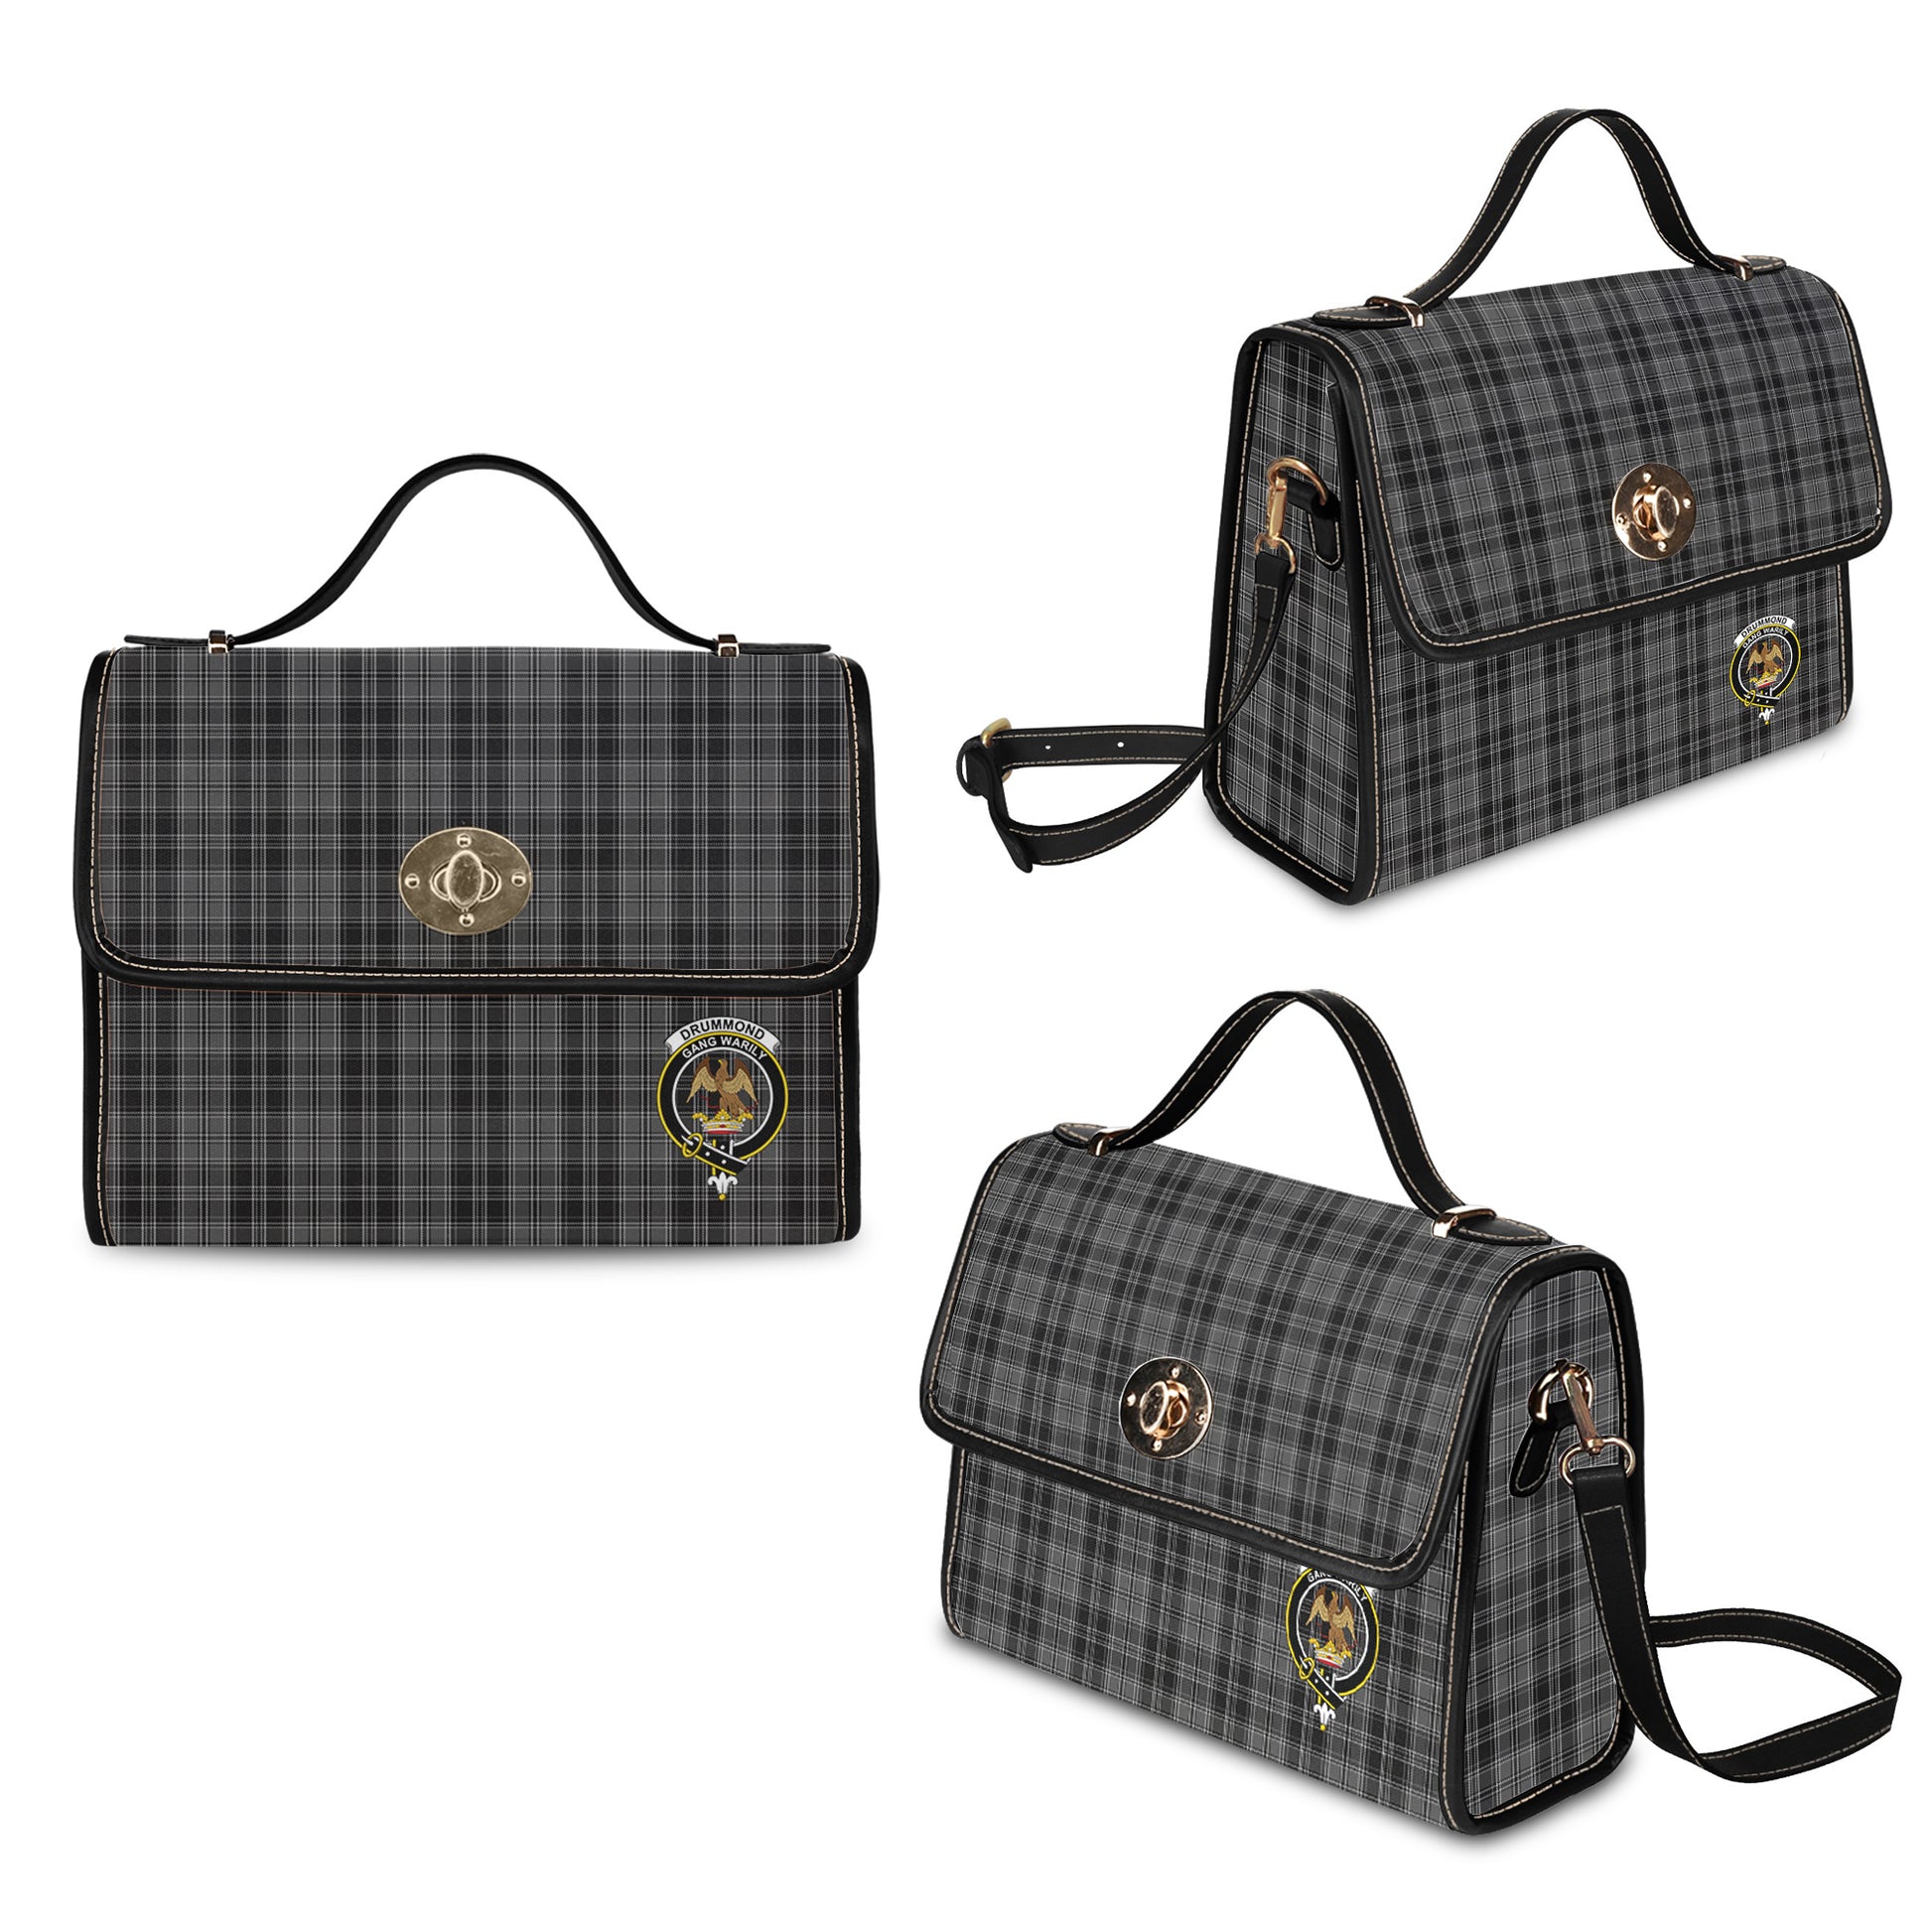 drummond-grey-tartan-leather-strap-waterproof-canvas-bag-with-family-crest